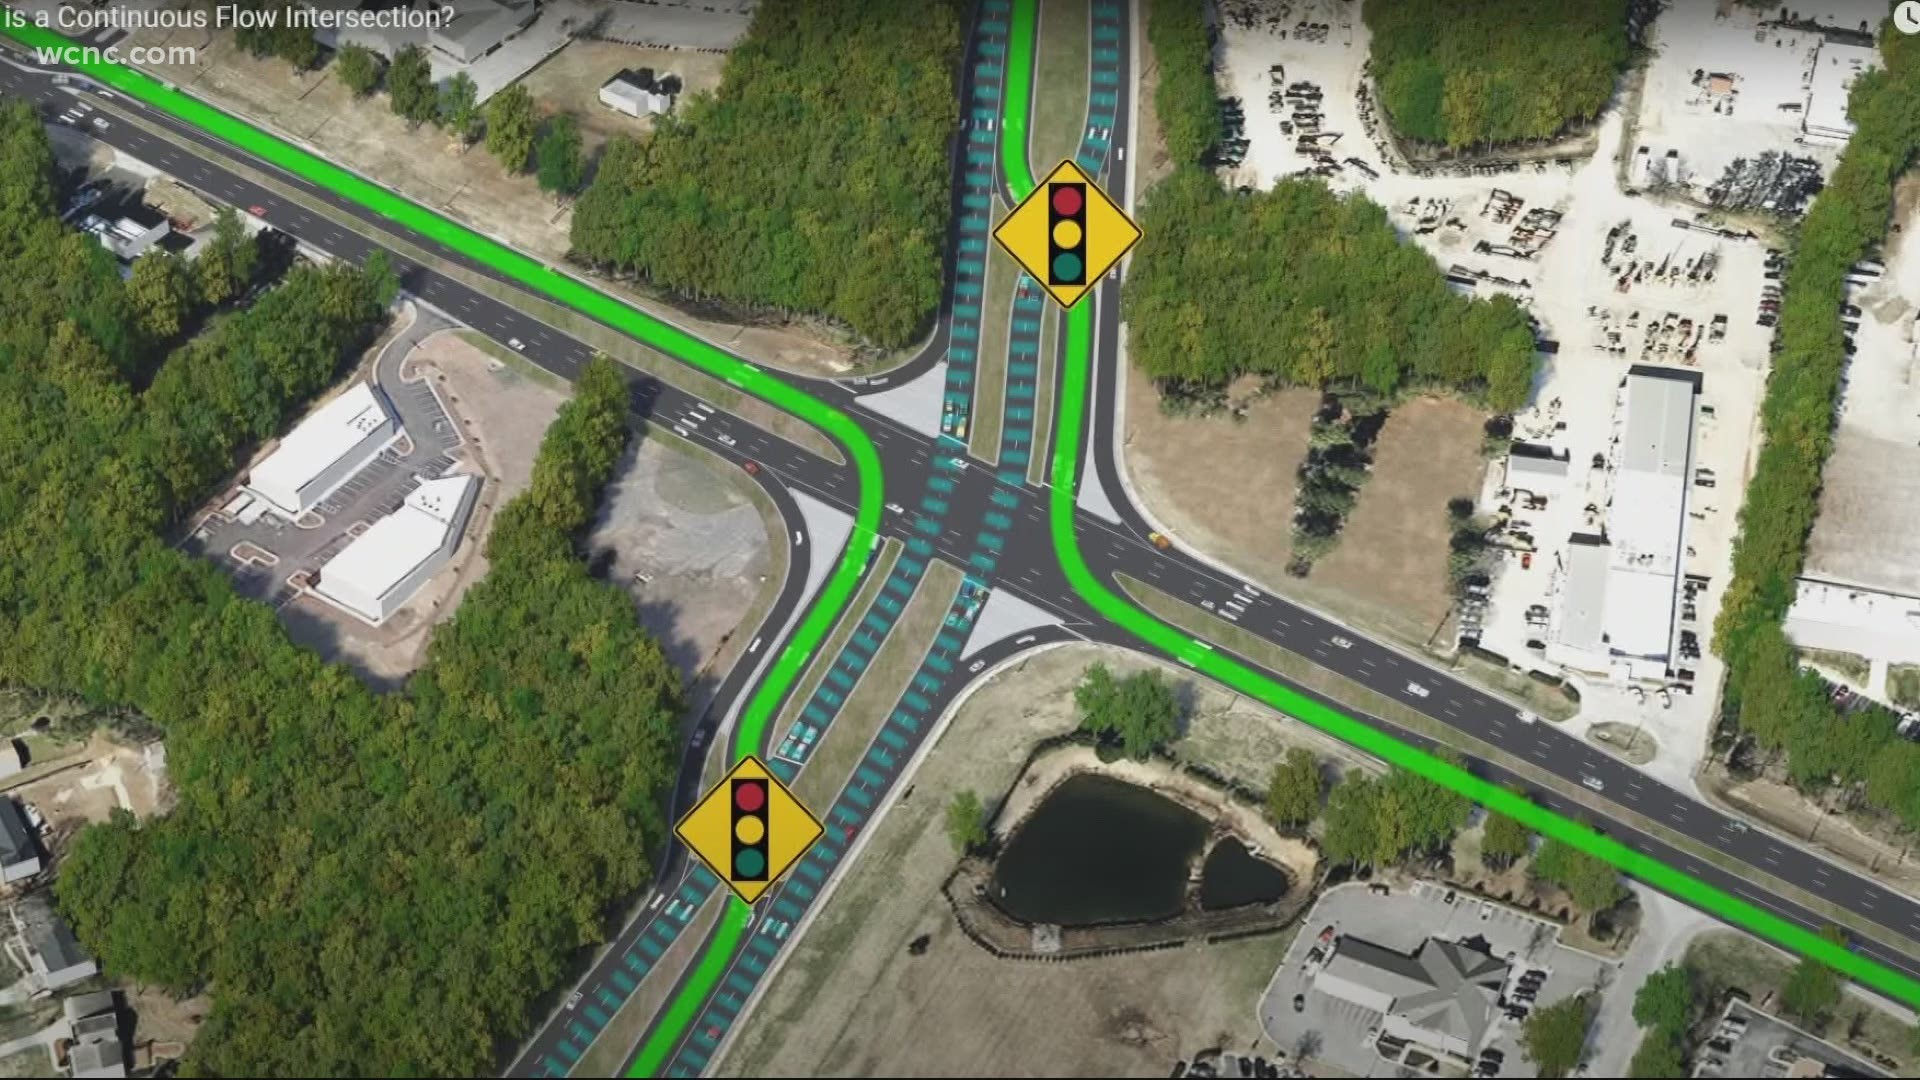 The continuous flow intersection at Brookshire Boulevard and Mount Holly-Huntersville Road is the first for North Carolina.